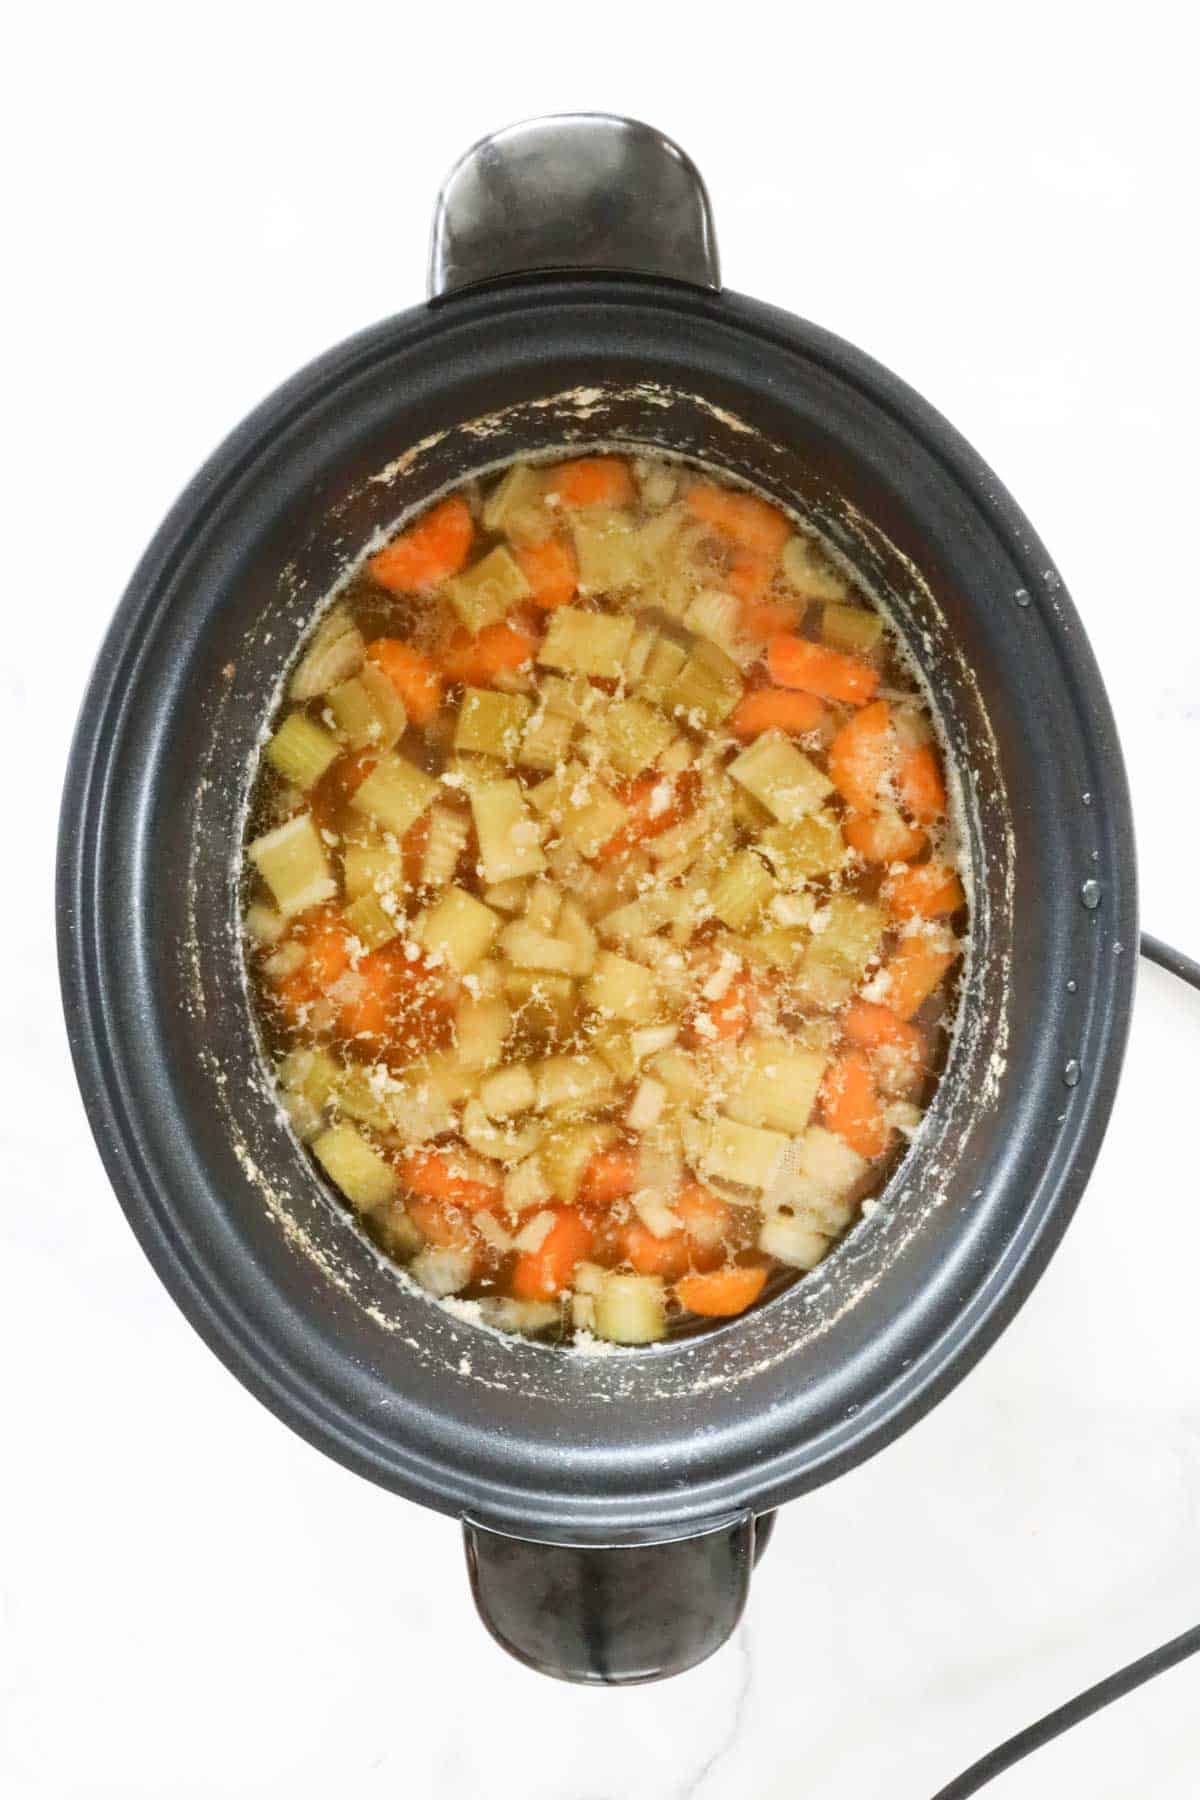 Cooked split pea and vegetable soup before being blended.